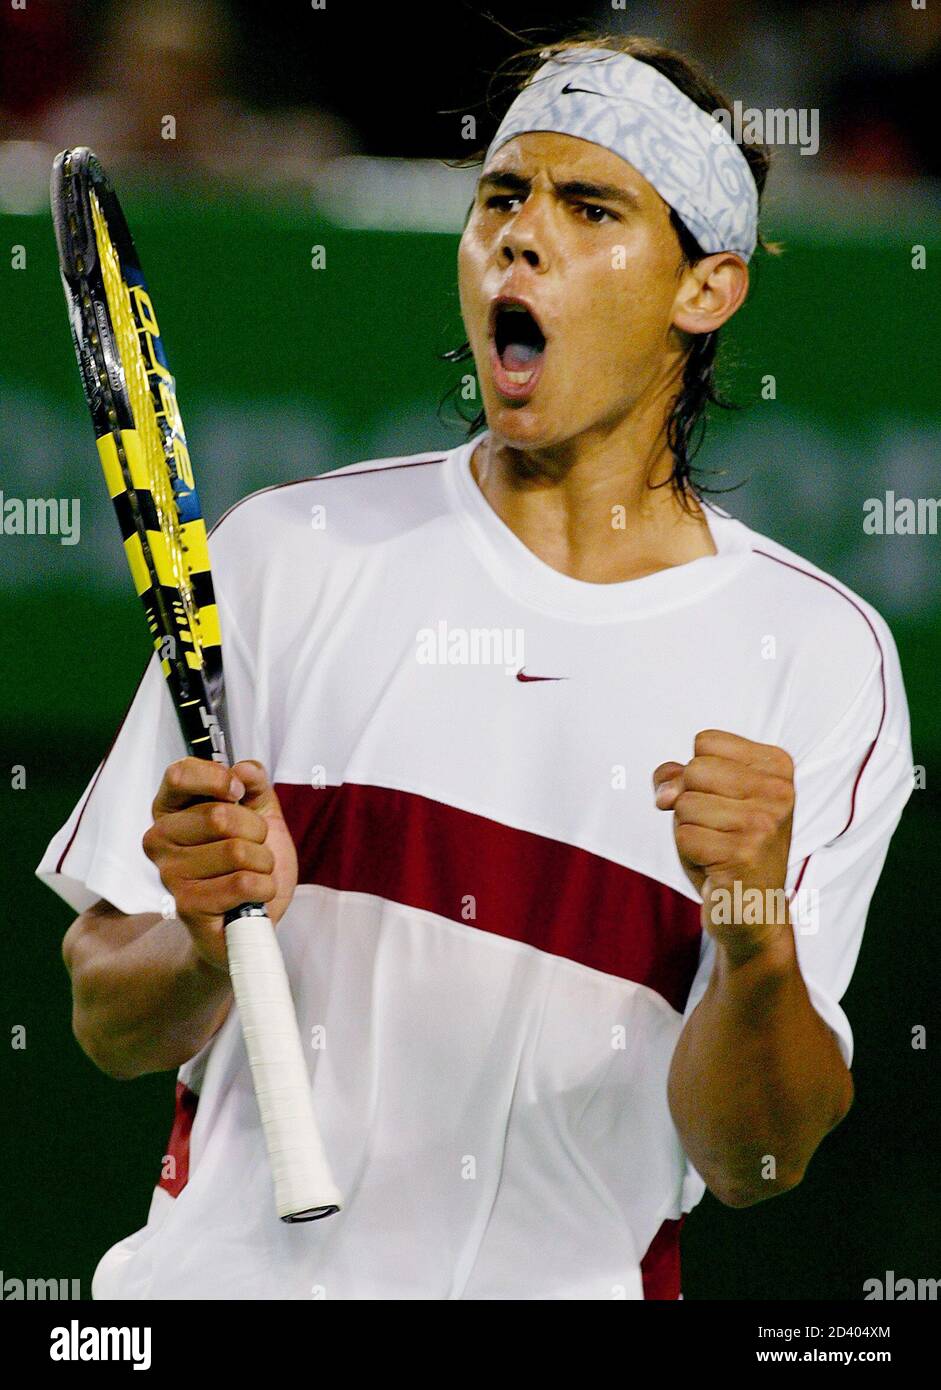 spains-rafael-nadal-reacts-during-his-third-round-match-against-australias-lleyton-hewitt-at-the-australian-open-tennis-championship-in-melbourne-january-24-2004-hewitt-won-the-match-7-6-7-6-6-2-reutersdavid-gray-cptw-2D404XM.jpg